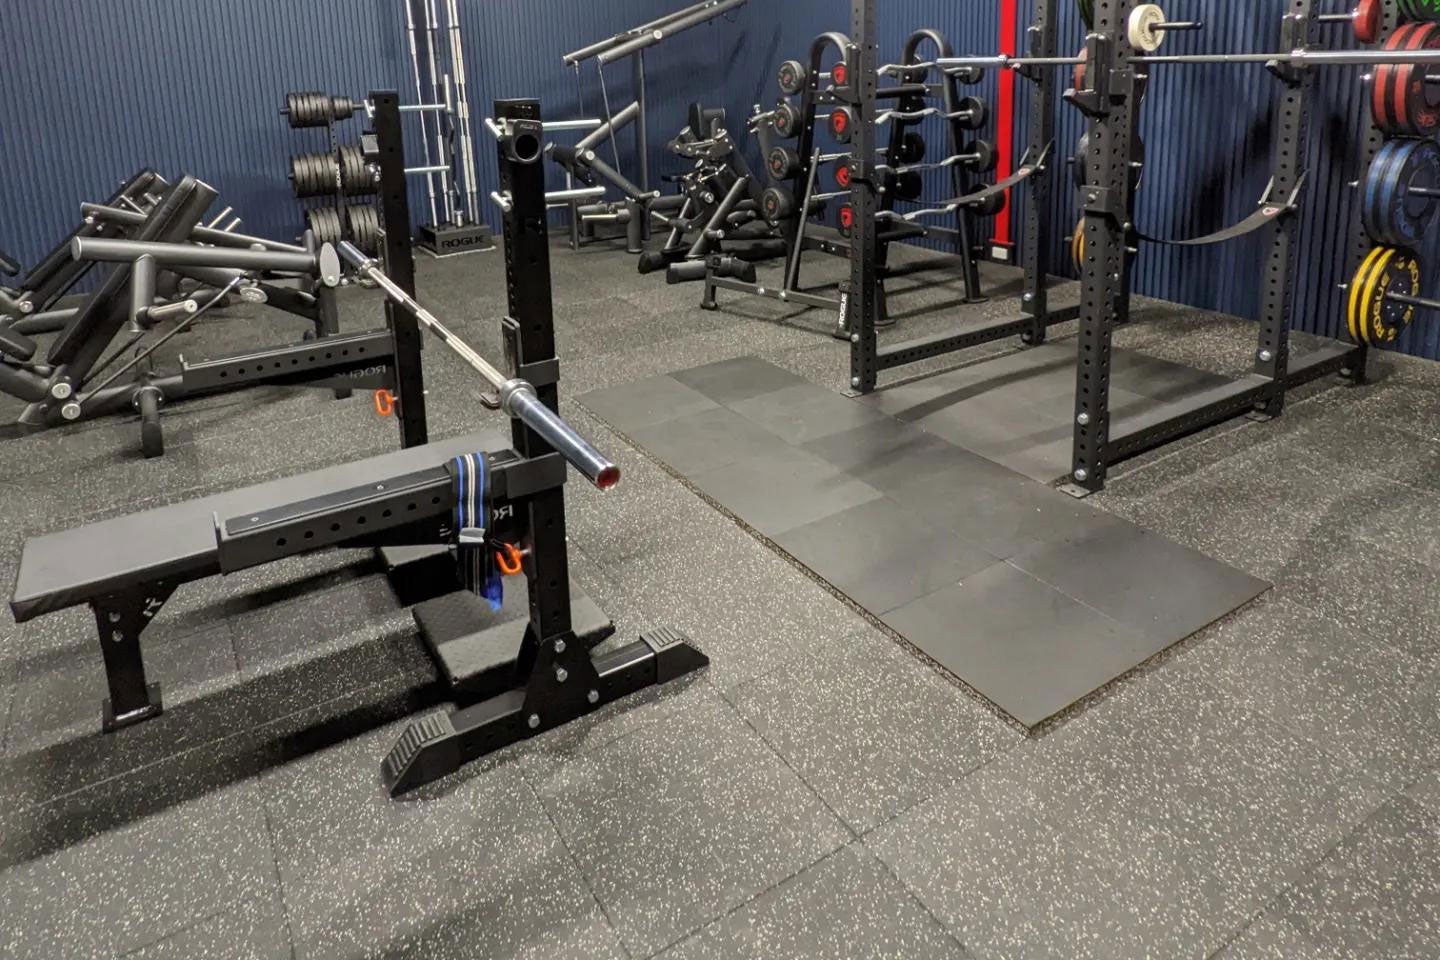 The strength of the floor required for a home gym and how to reinforce the floor